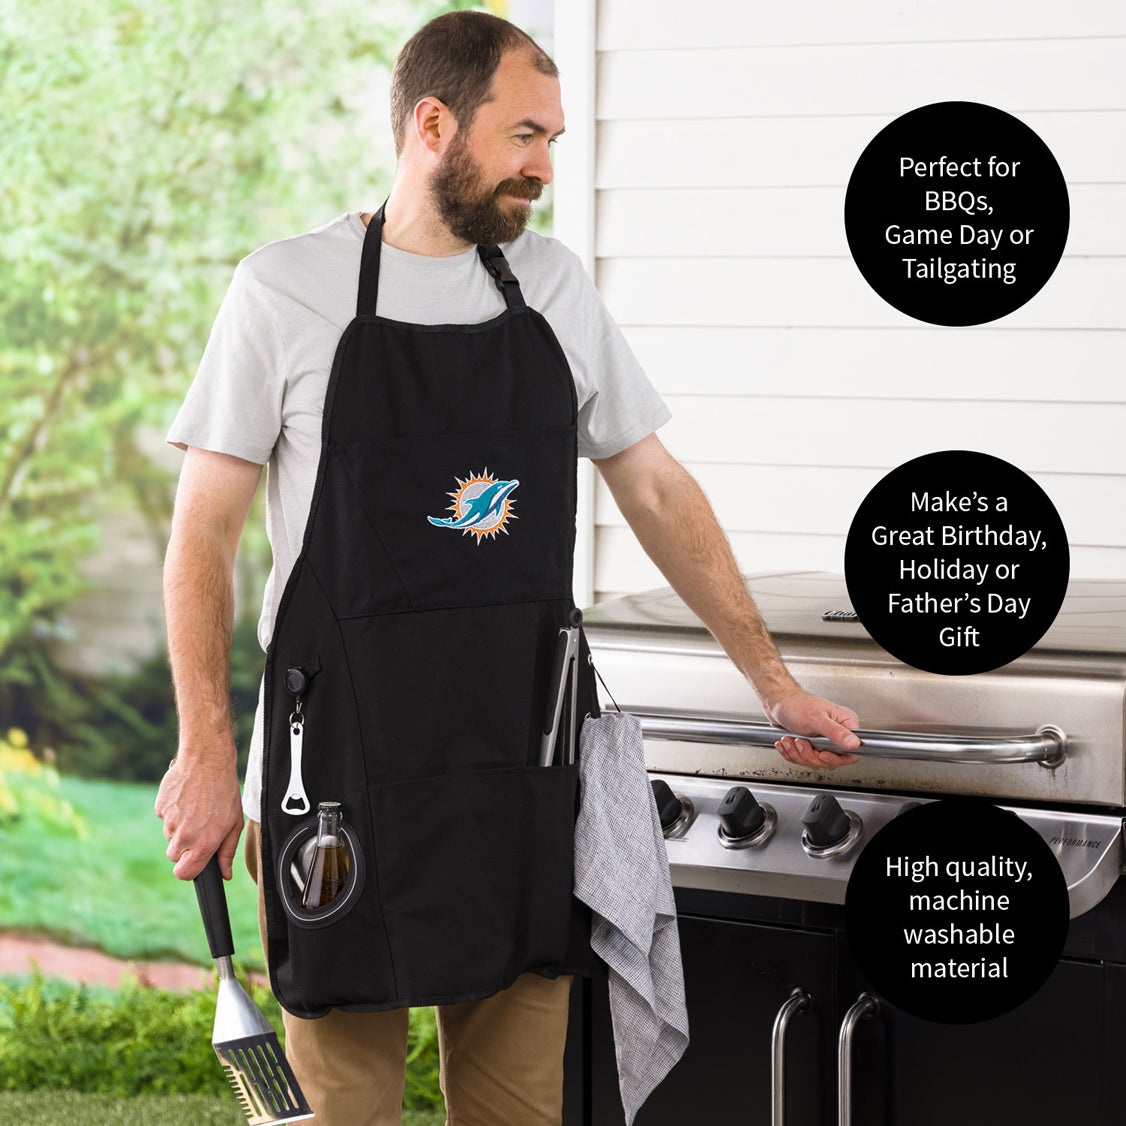 Miami Dolphins Grilling Apron